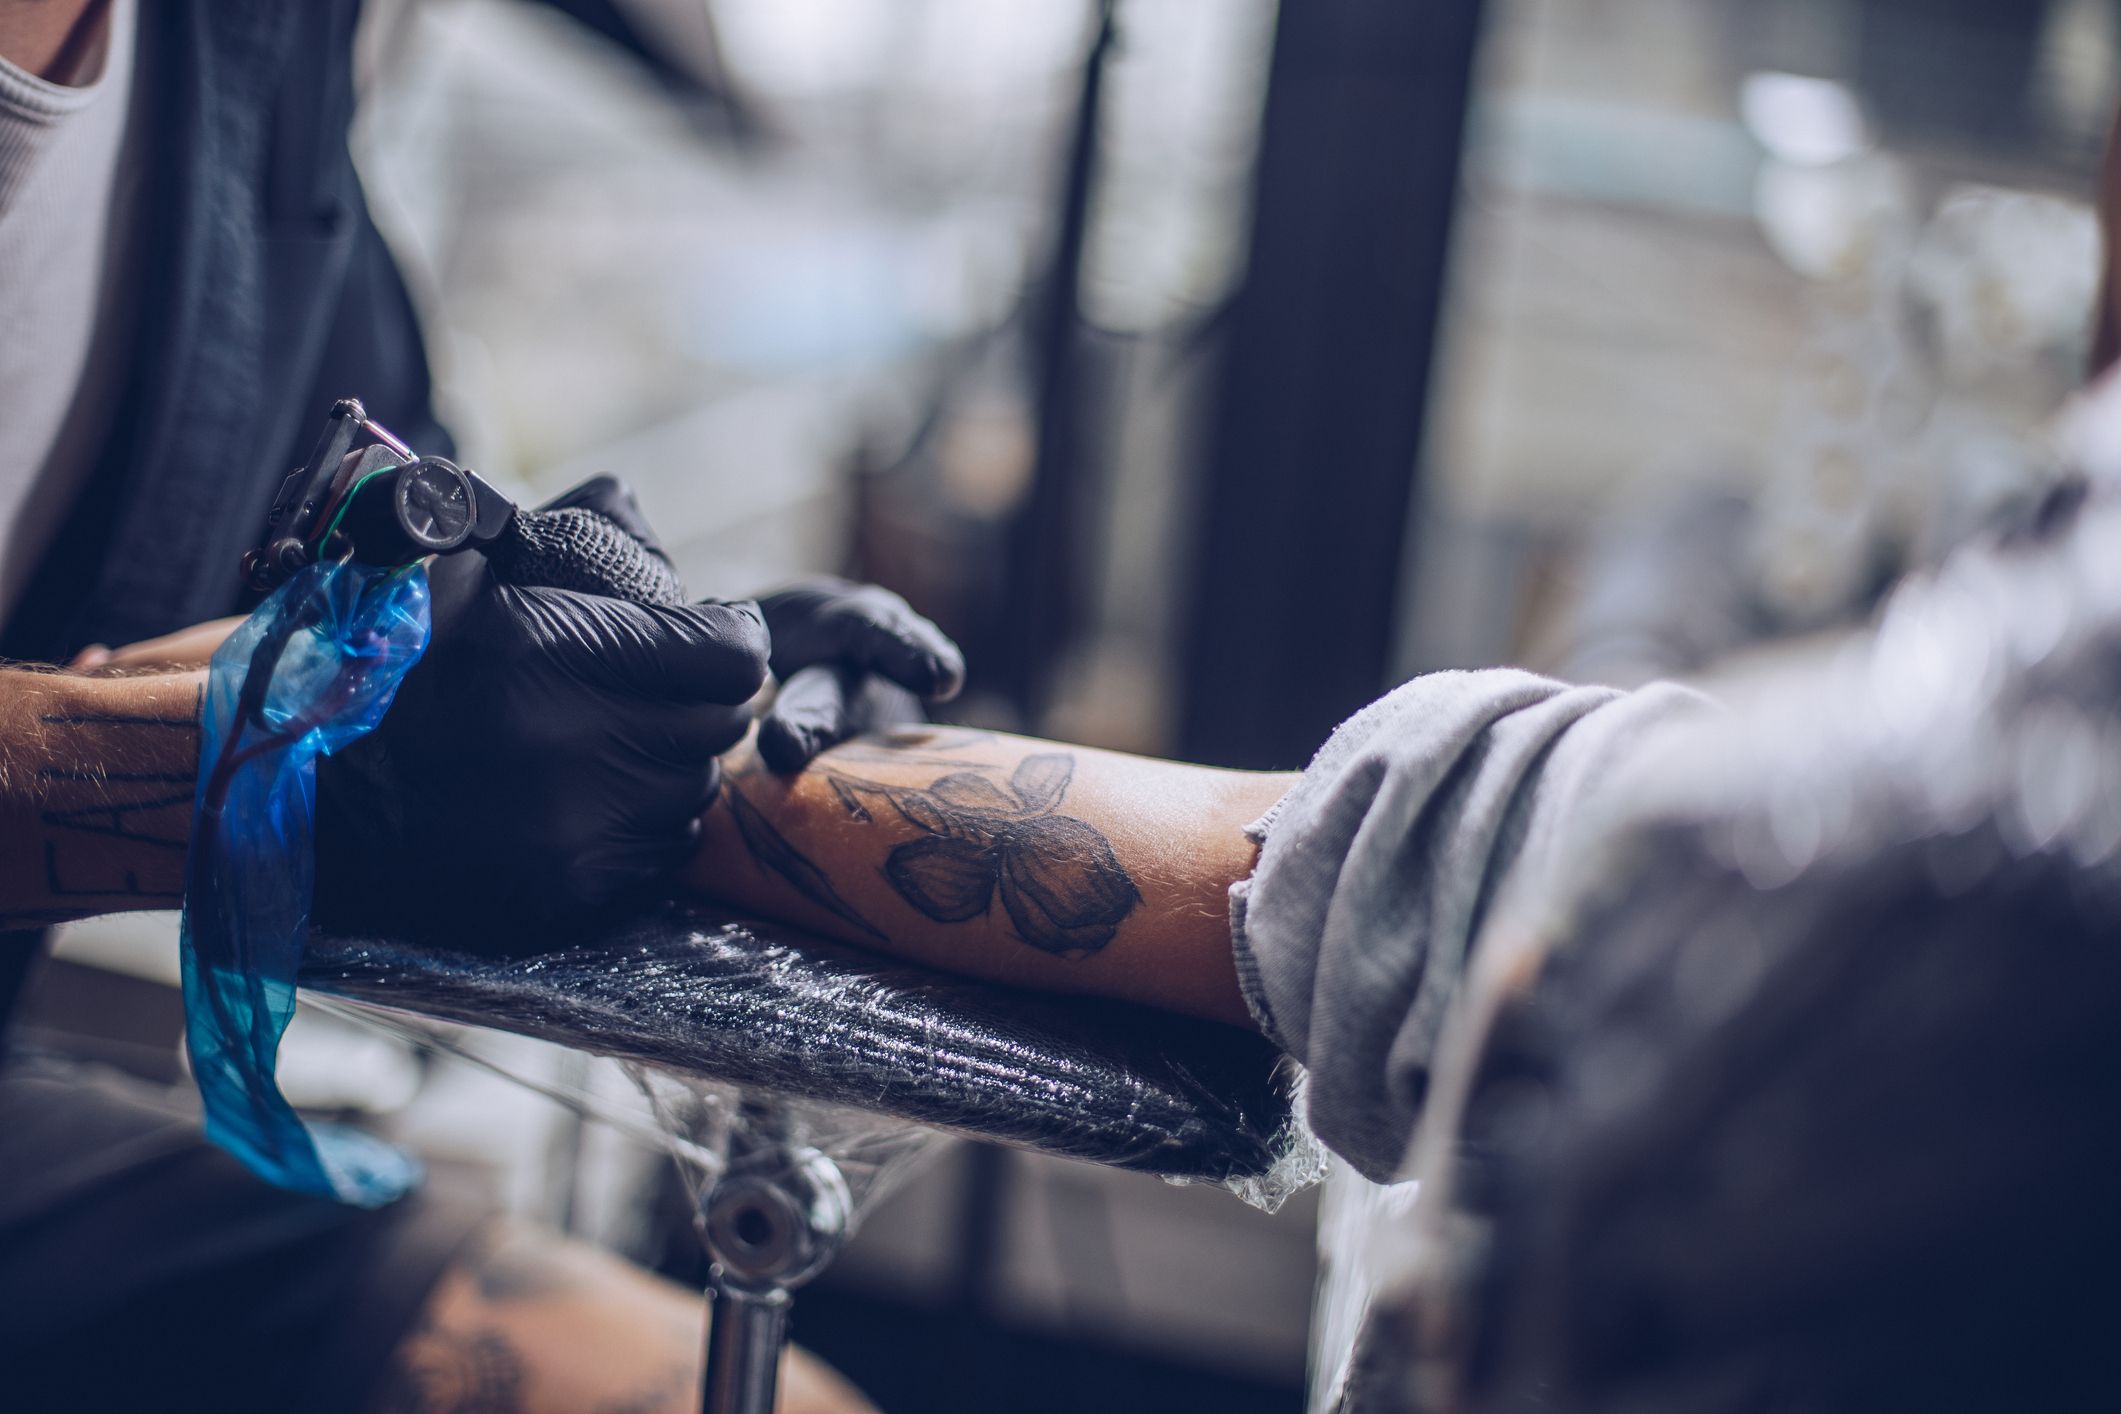 How to Take Care of a New Tattoo, According to an Expert